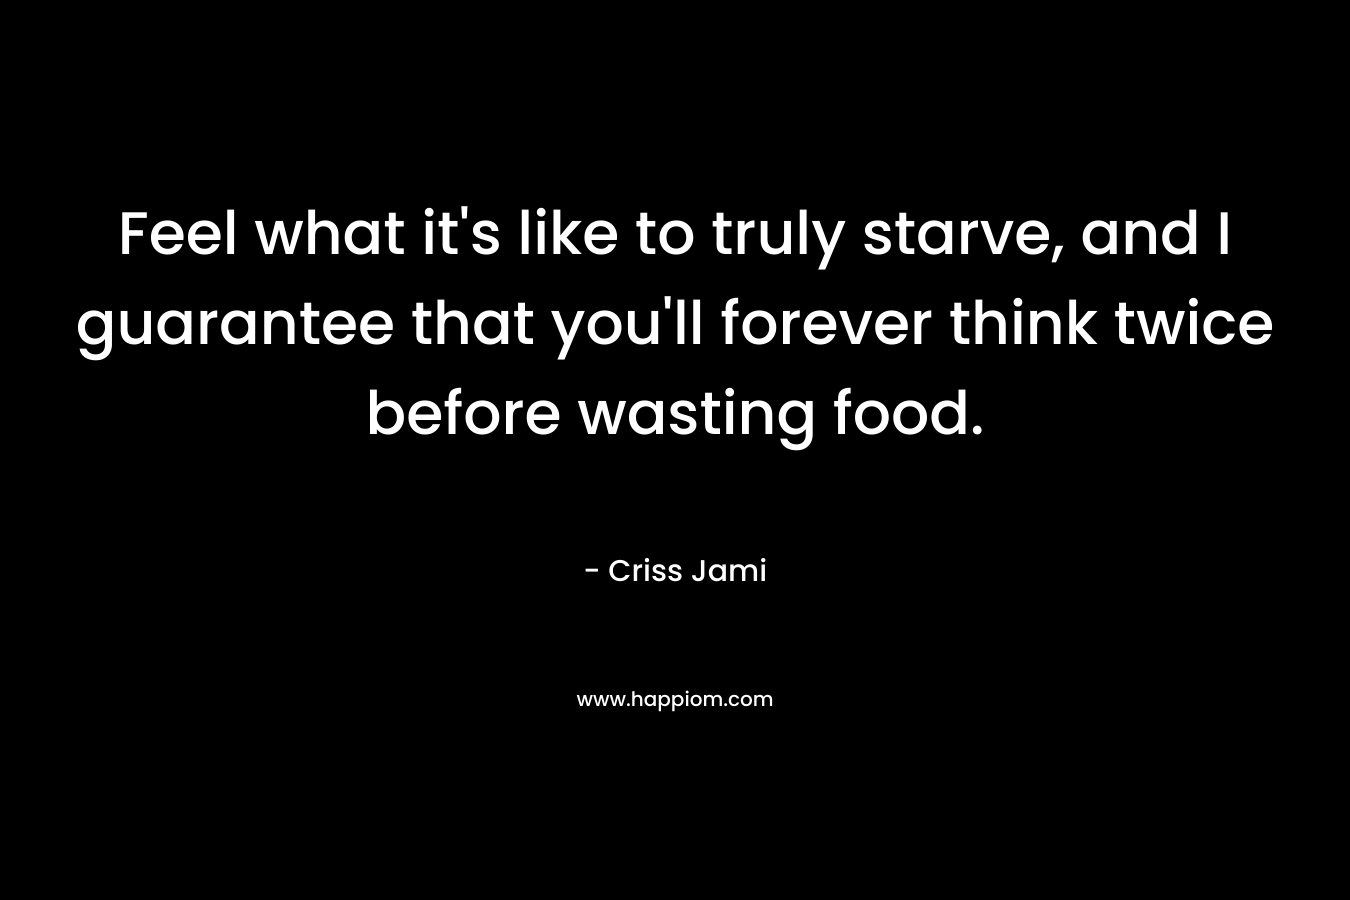 Feel what it’s like to truly starve, and I guarantee that you’ll forever think twice before wasting food. – Criss Jami